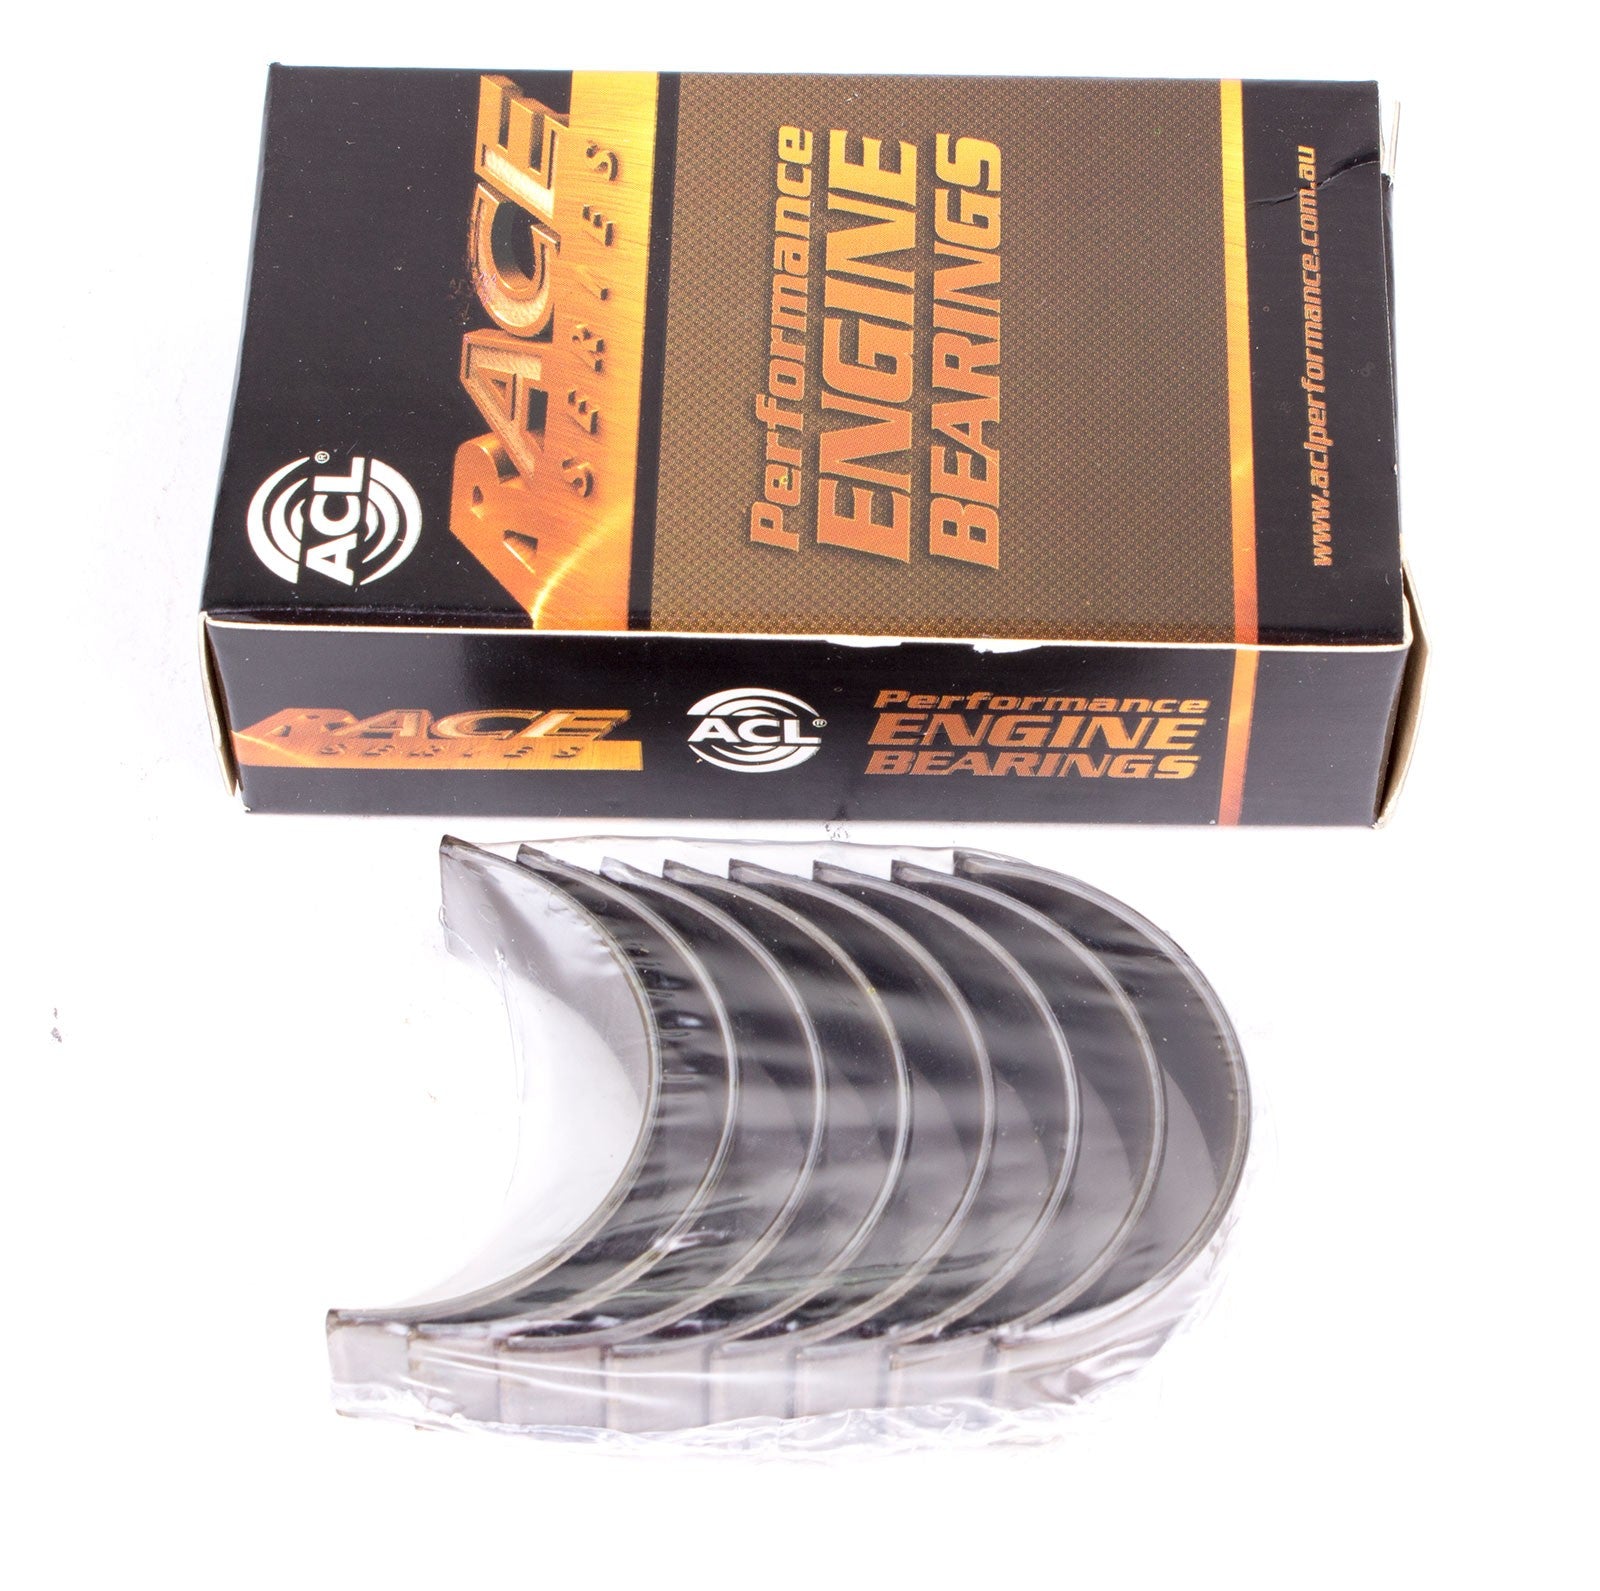 ACL 5M8092H-.025 Main bearing set (ACL Race Series) Photo-0 